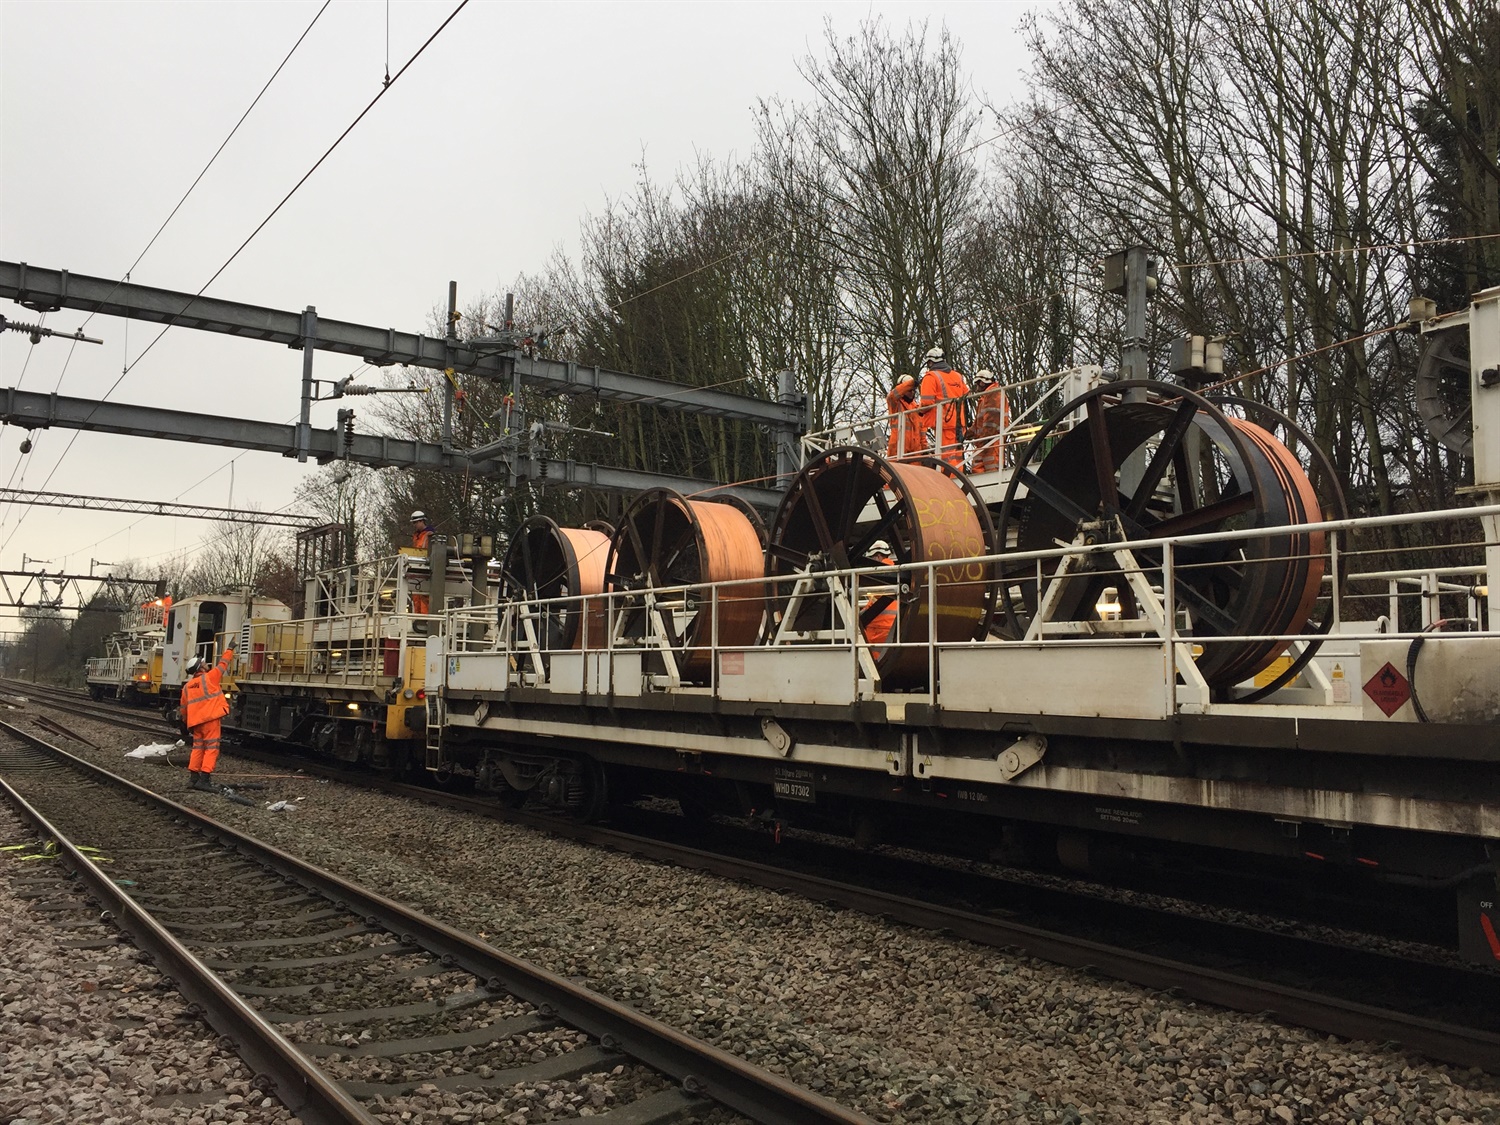 Norwich to London closures over Christmas as engineers replace 1950s wiring